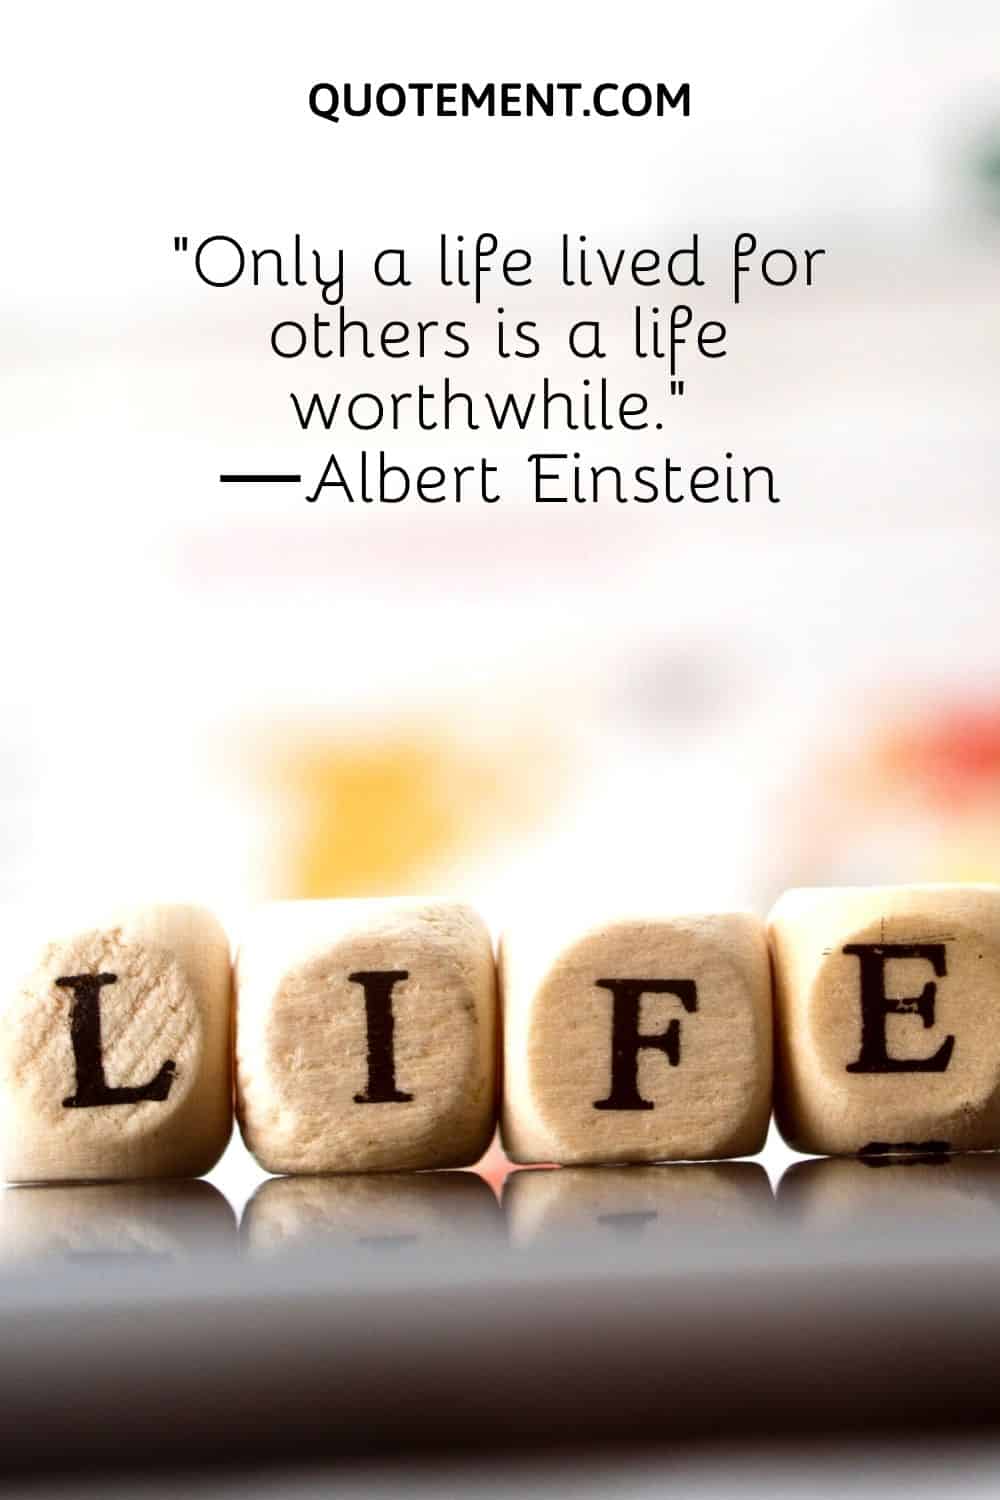 Only a life lived for others is a life worthwhile